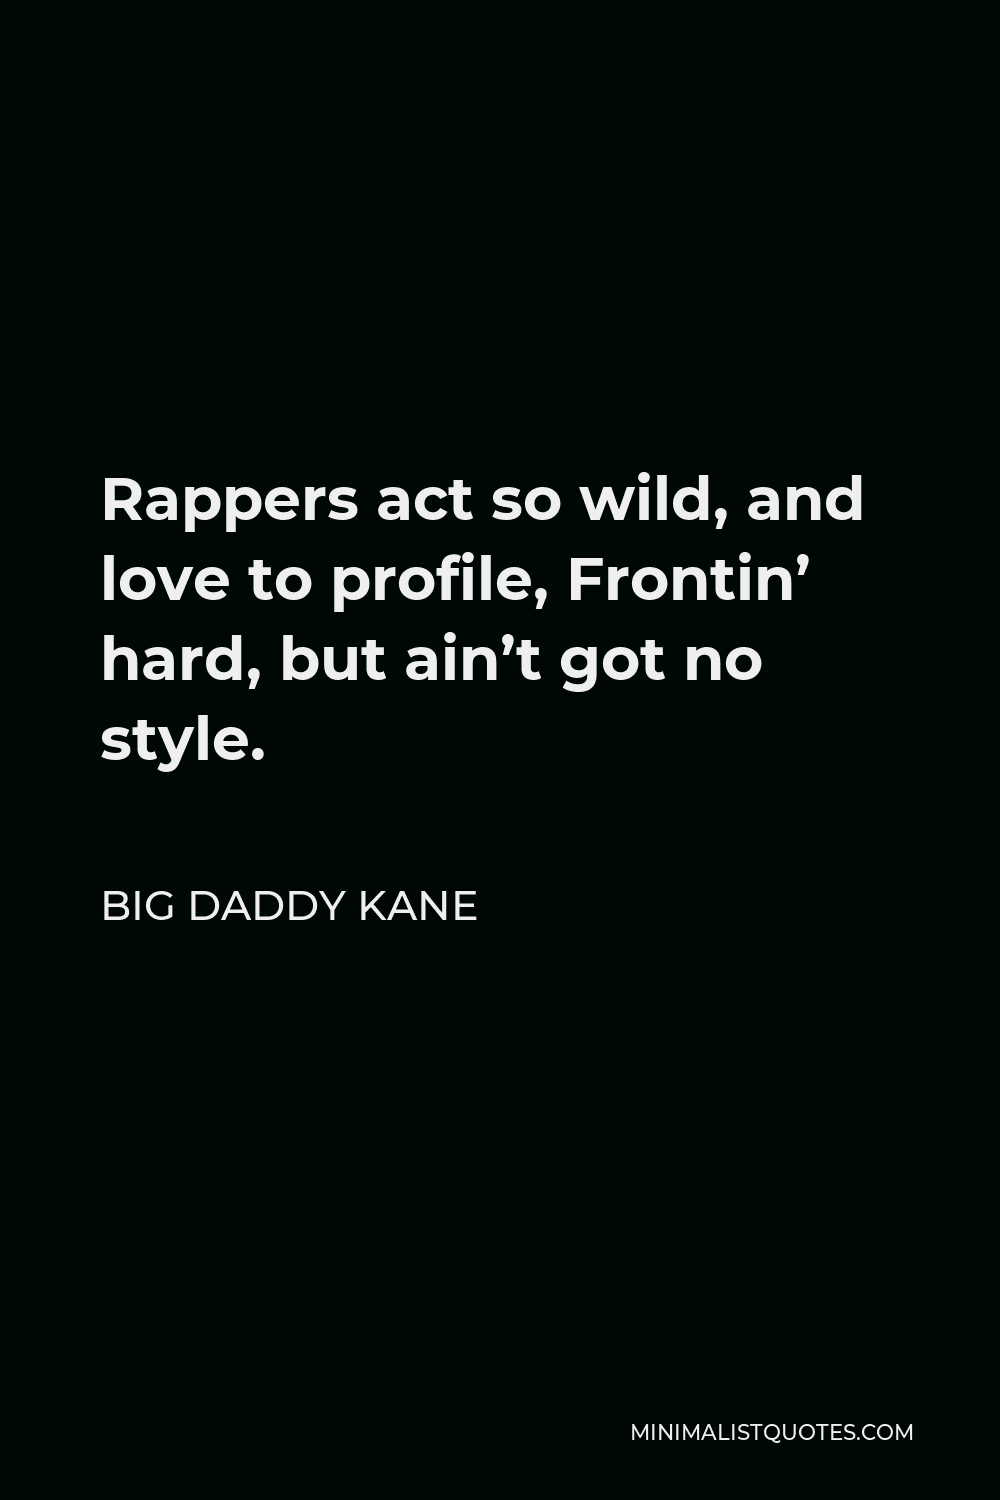 Big Daddy Kane Quote - Rappers act so wild, and love to profile, Frontin’ hard, but ain’t got no style.